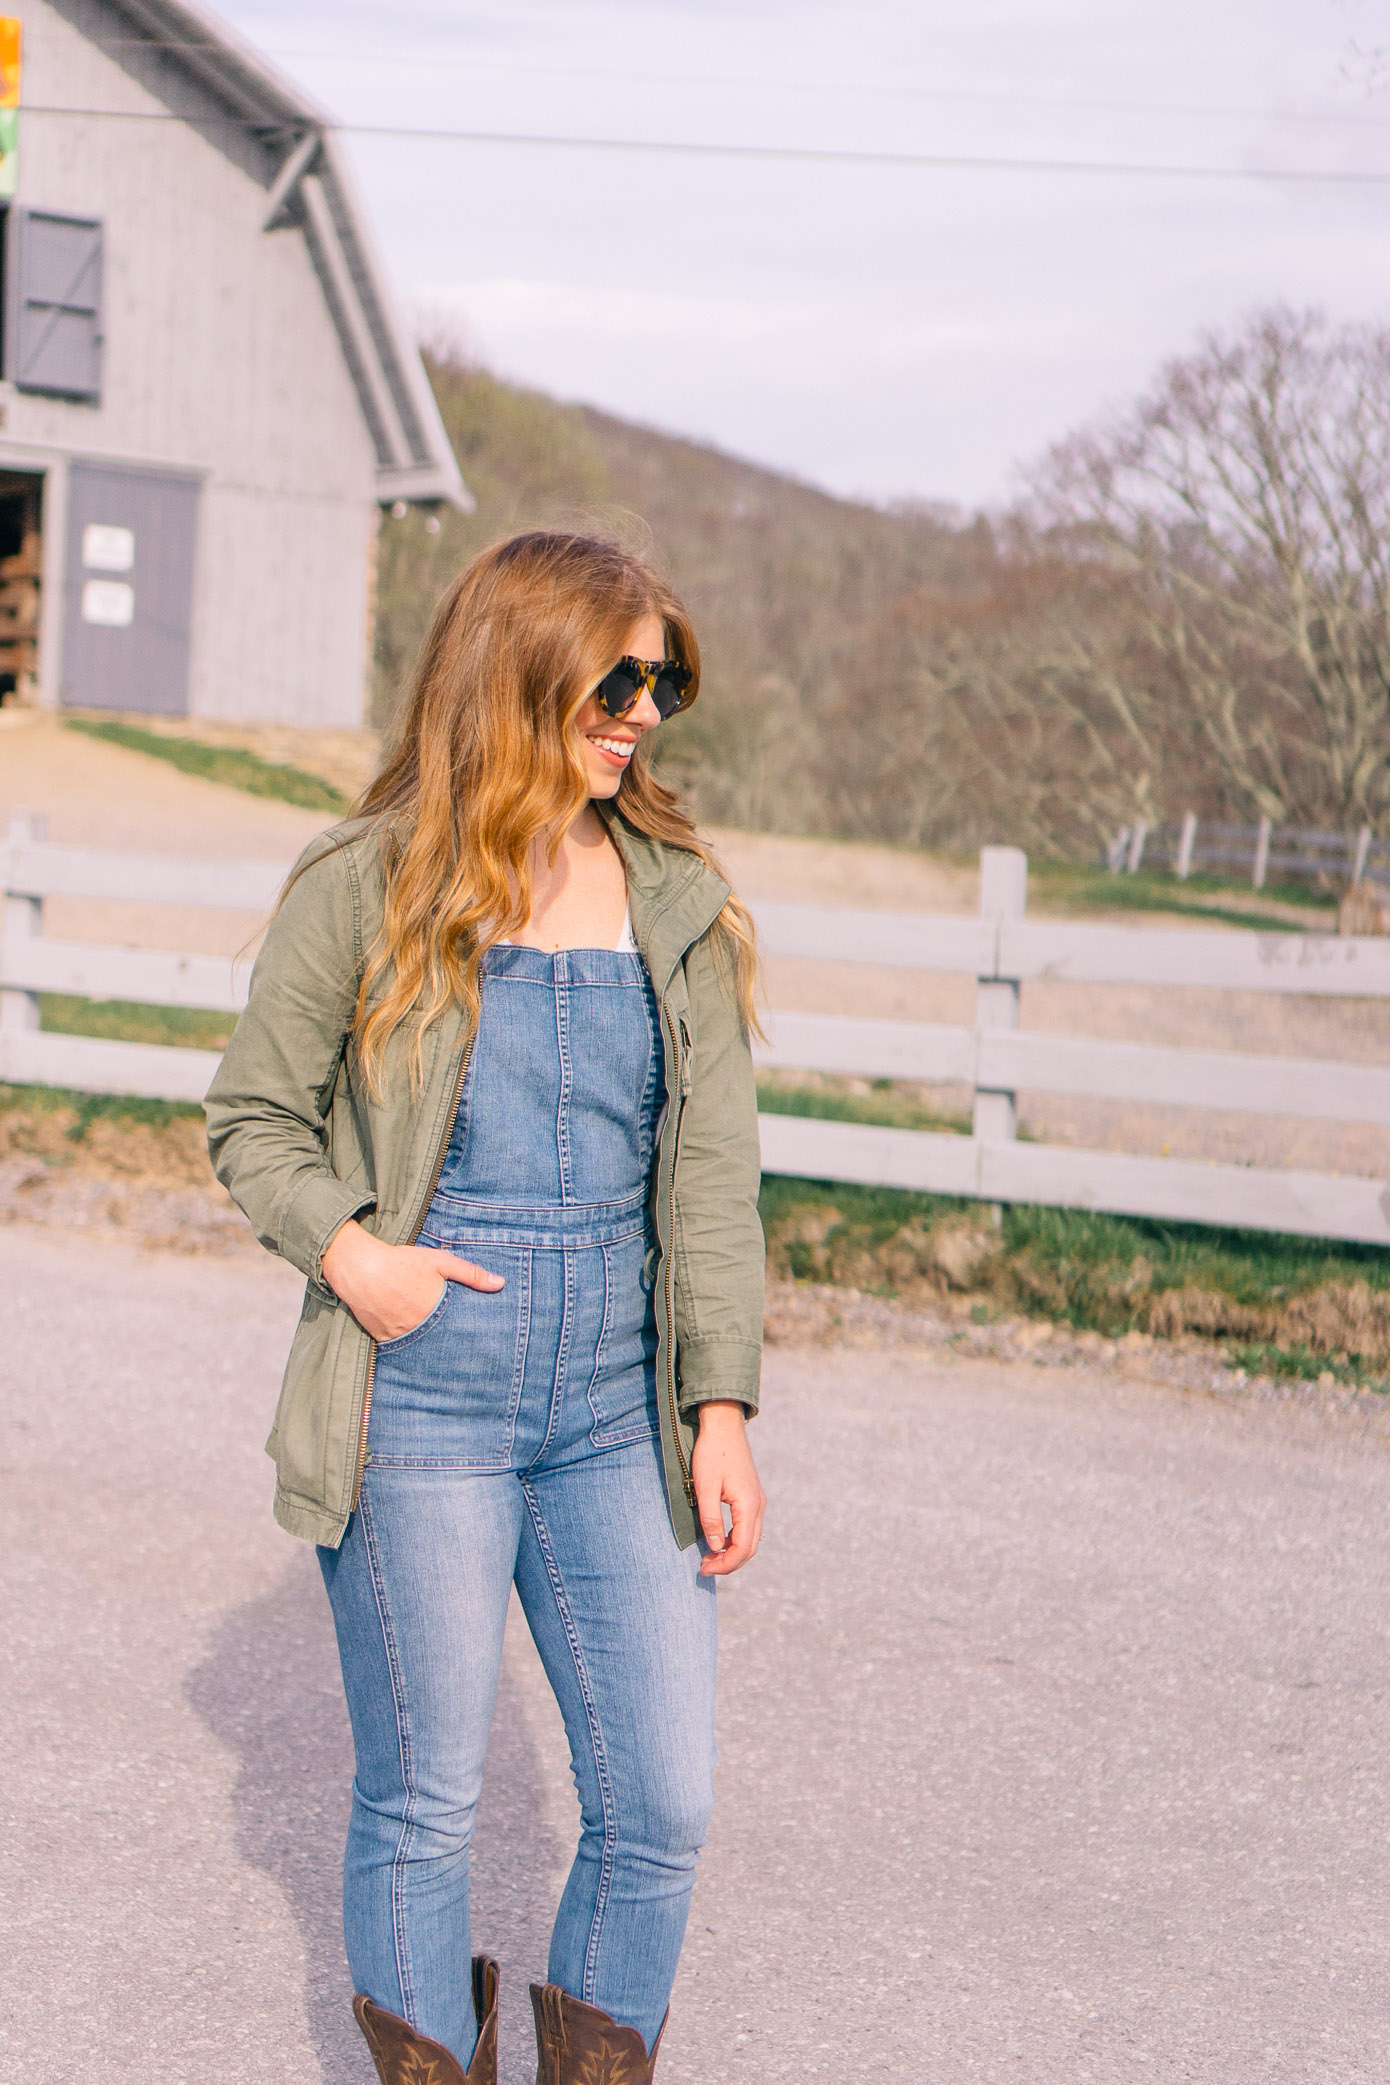 What to Wear Horseback Riding | Overalls Styled with Cowboy Boots | Louella Reese Life & Style Blog